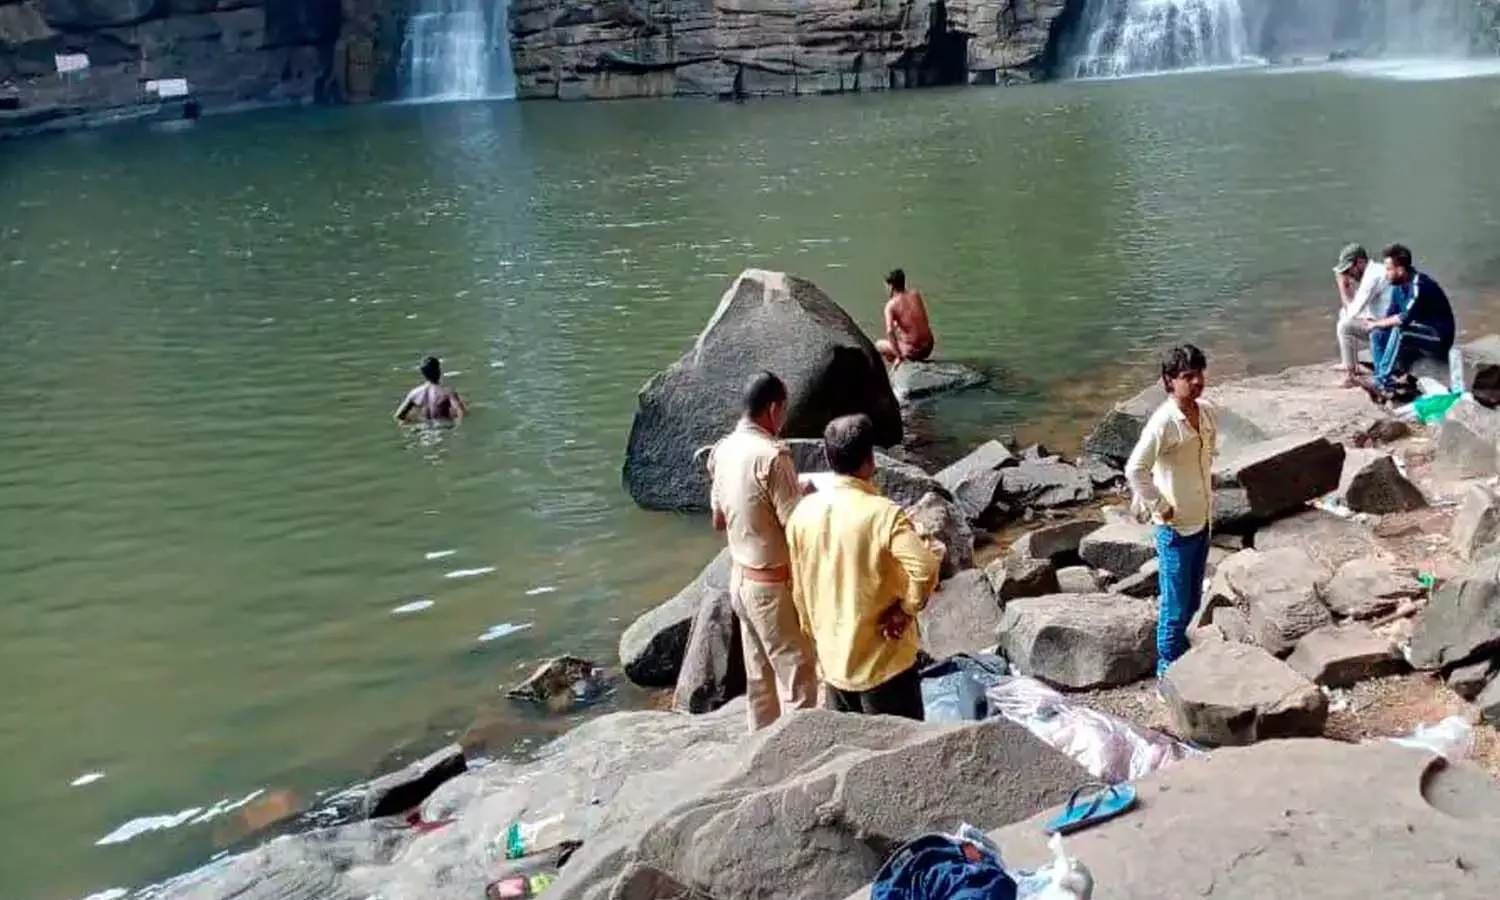 In Mirzapur today again a young man drowned on the chosen door, a young man got hurt